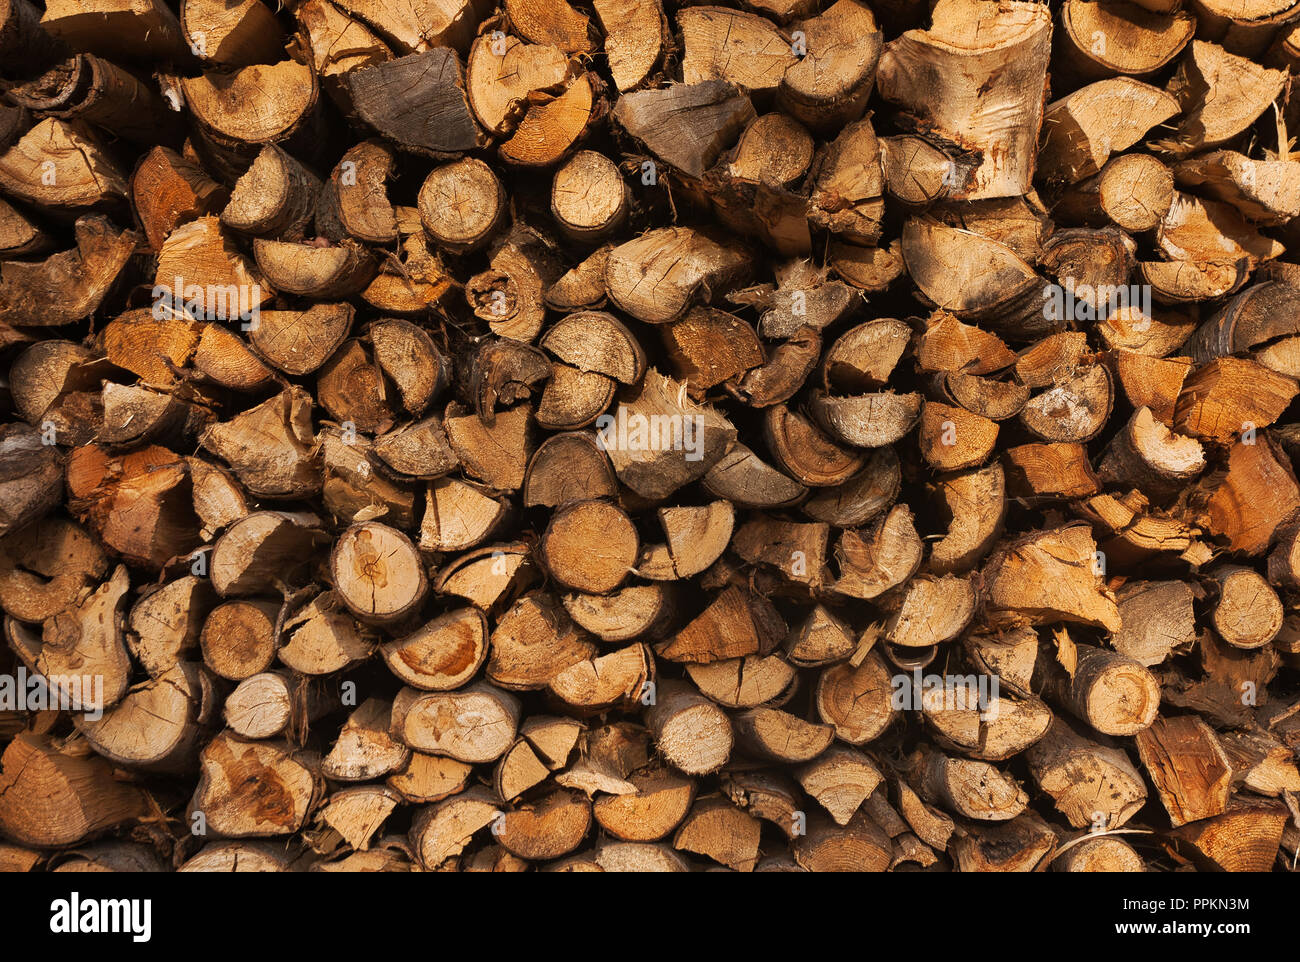 Cord Of Firewood Stock Photos Cord Of Firewood Stock Images Alamy